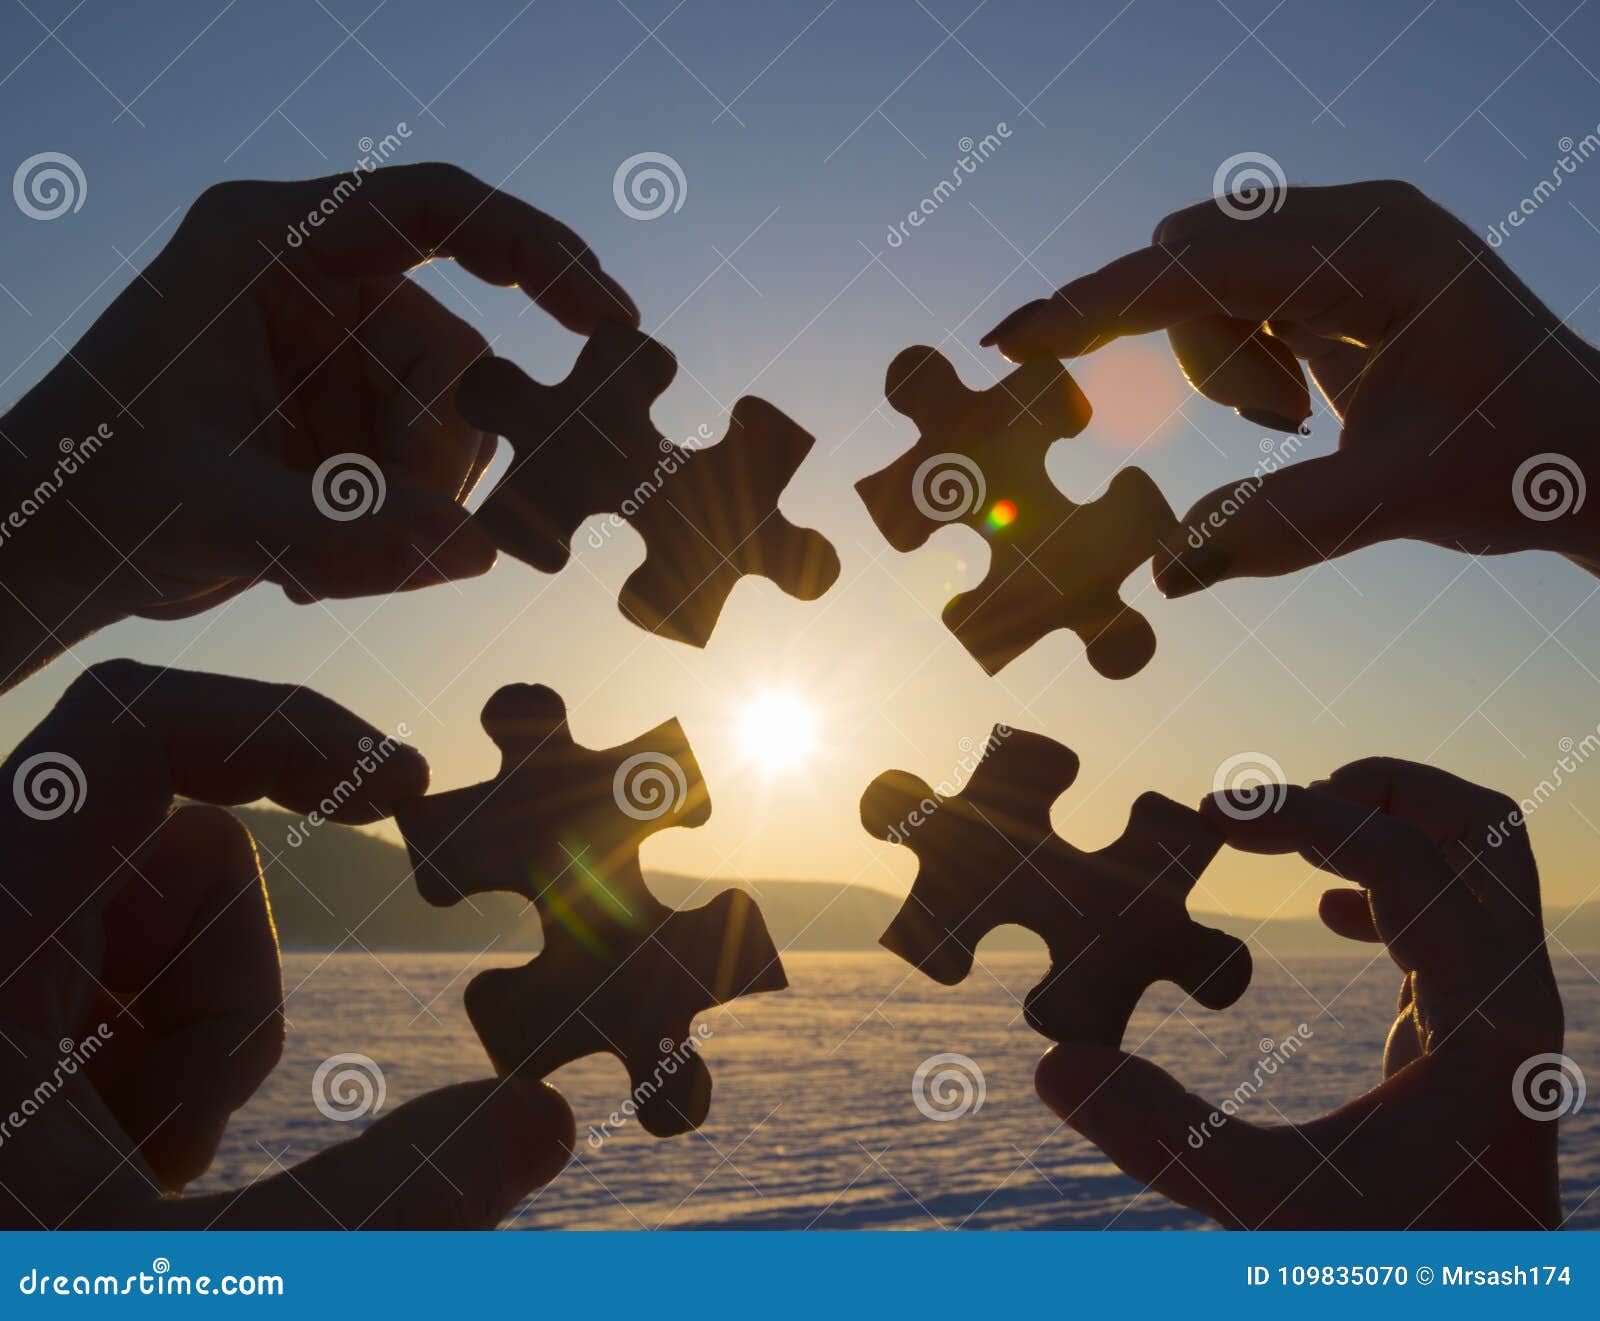 collaborate four hands trying to connect a puzzle piece with a sunset background.